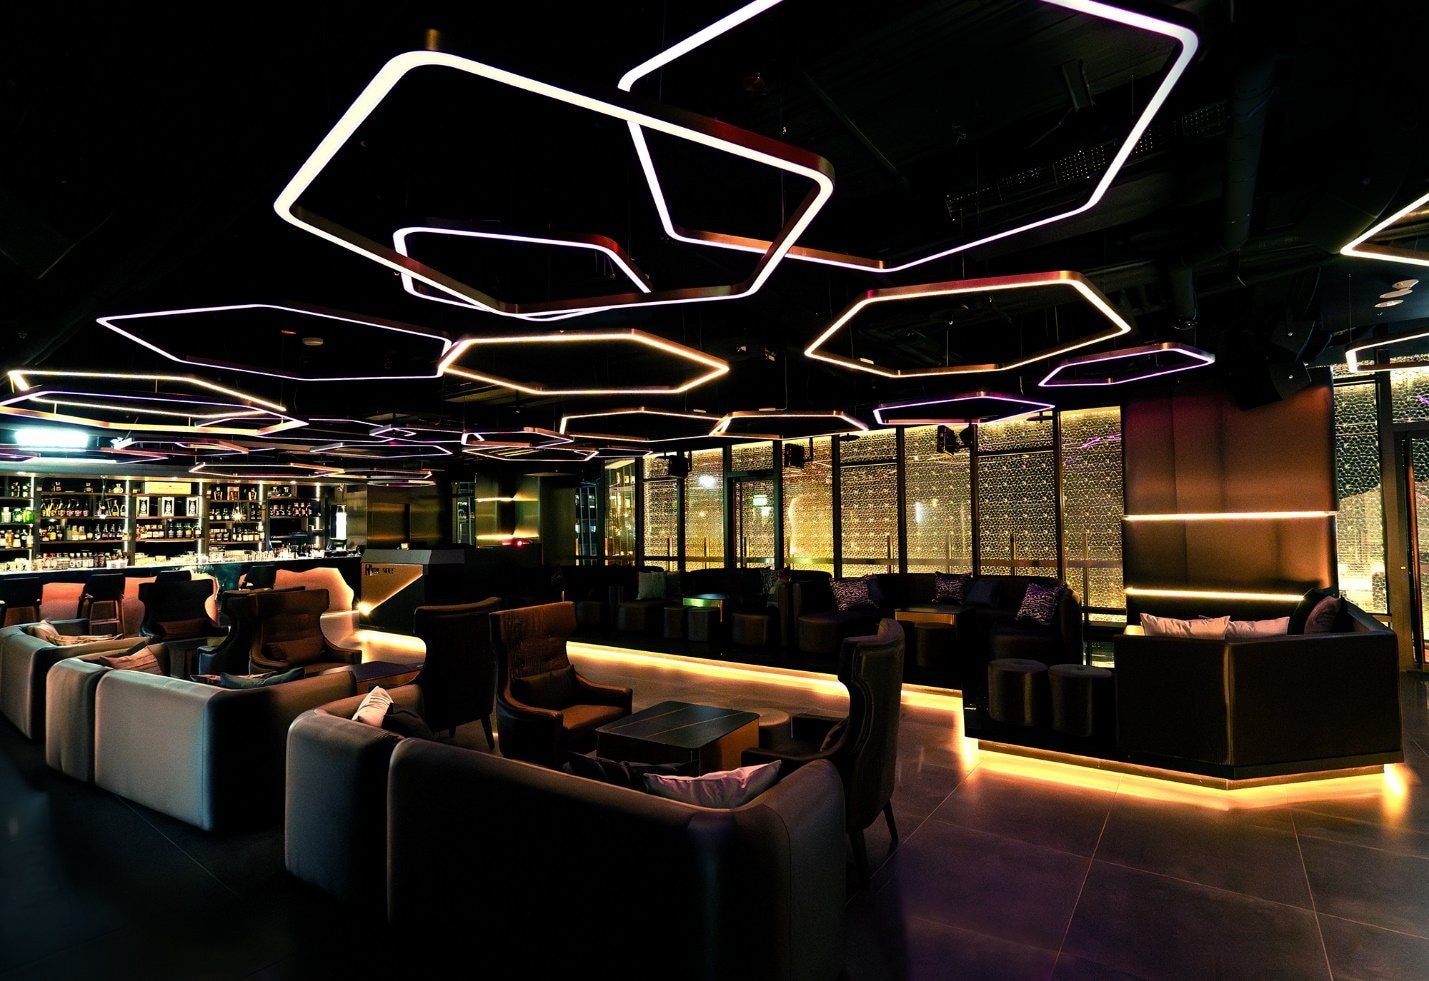 NEXO sound rules at ONE RULE, a sophisticated new bar complex in Taipei